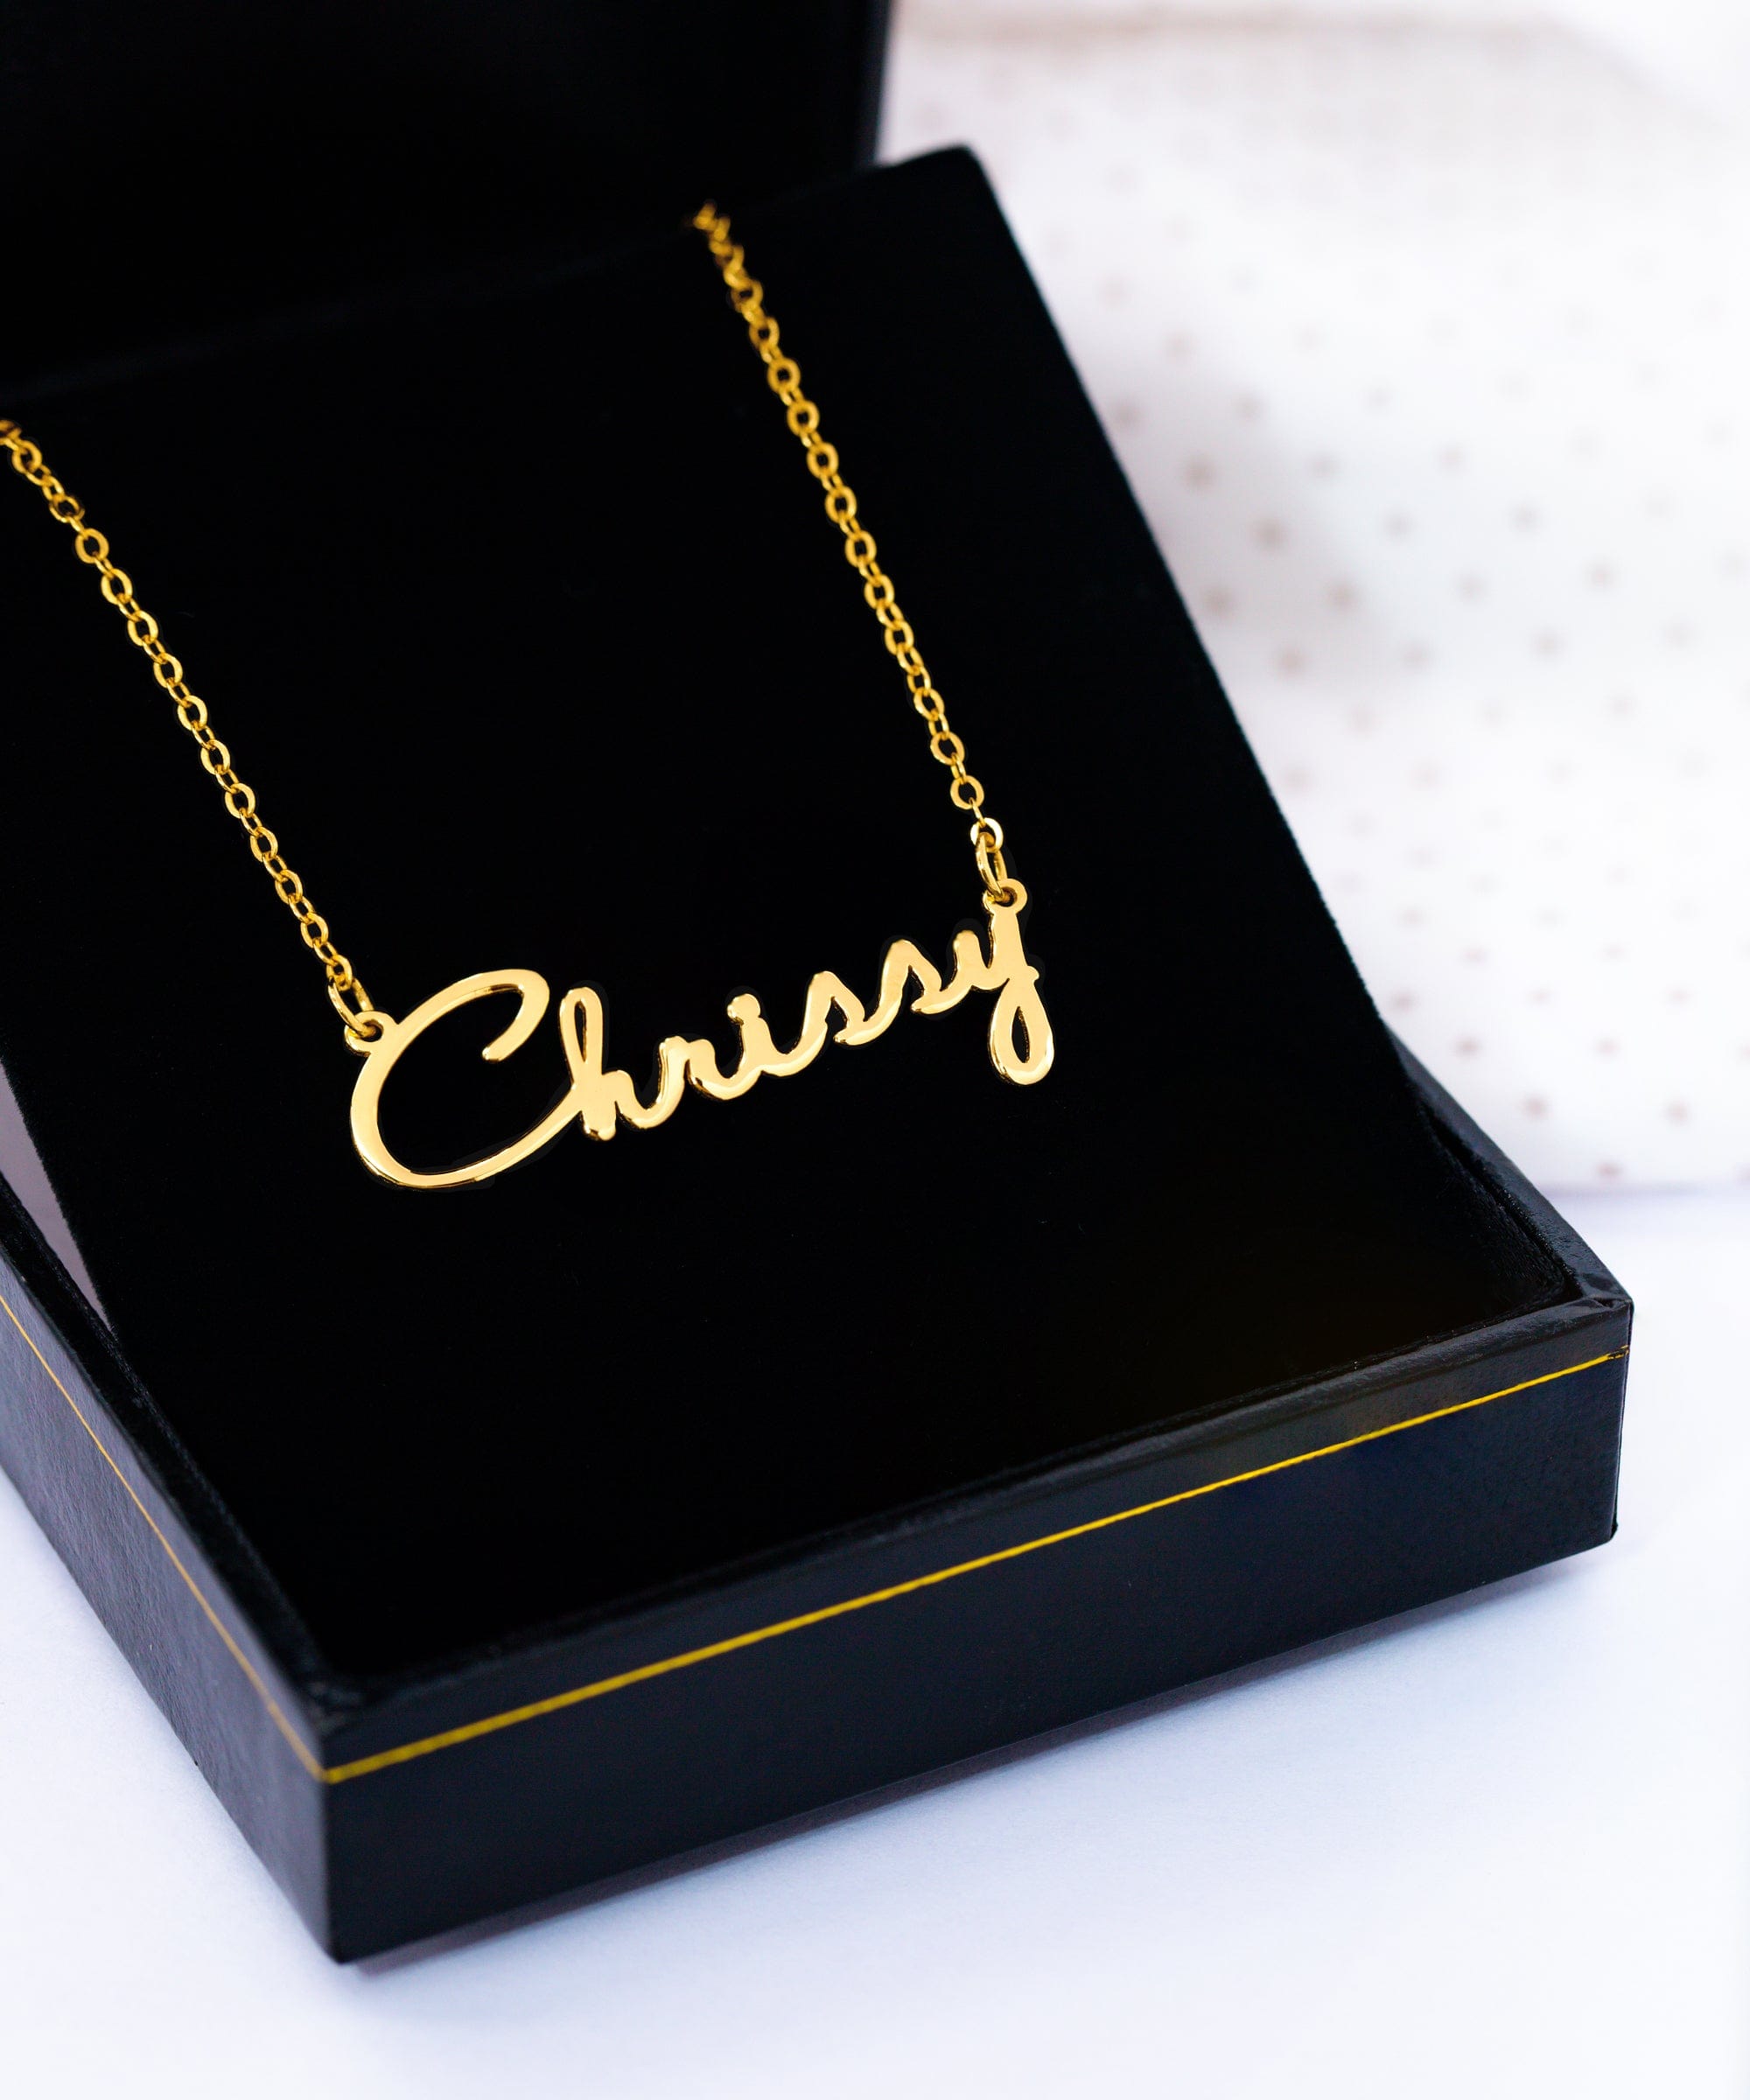 Chrissy Style Name Necklace